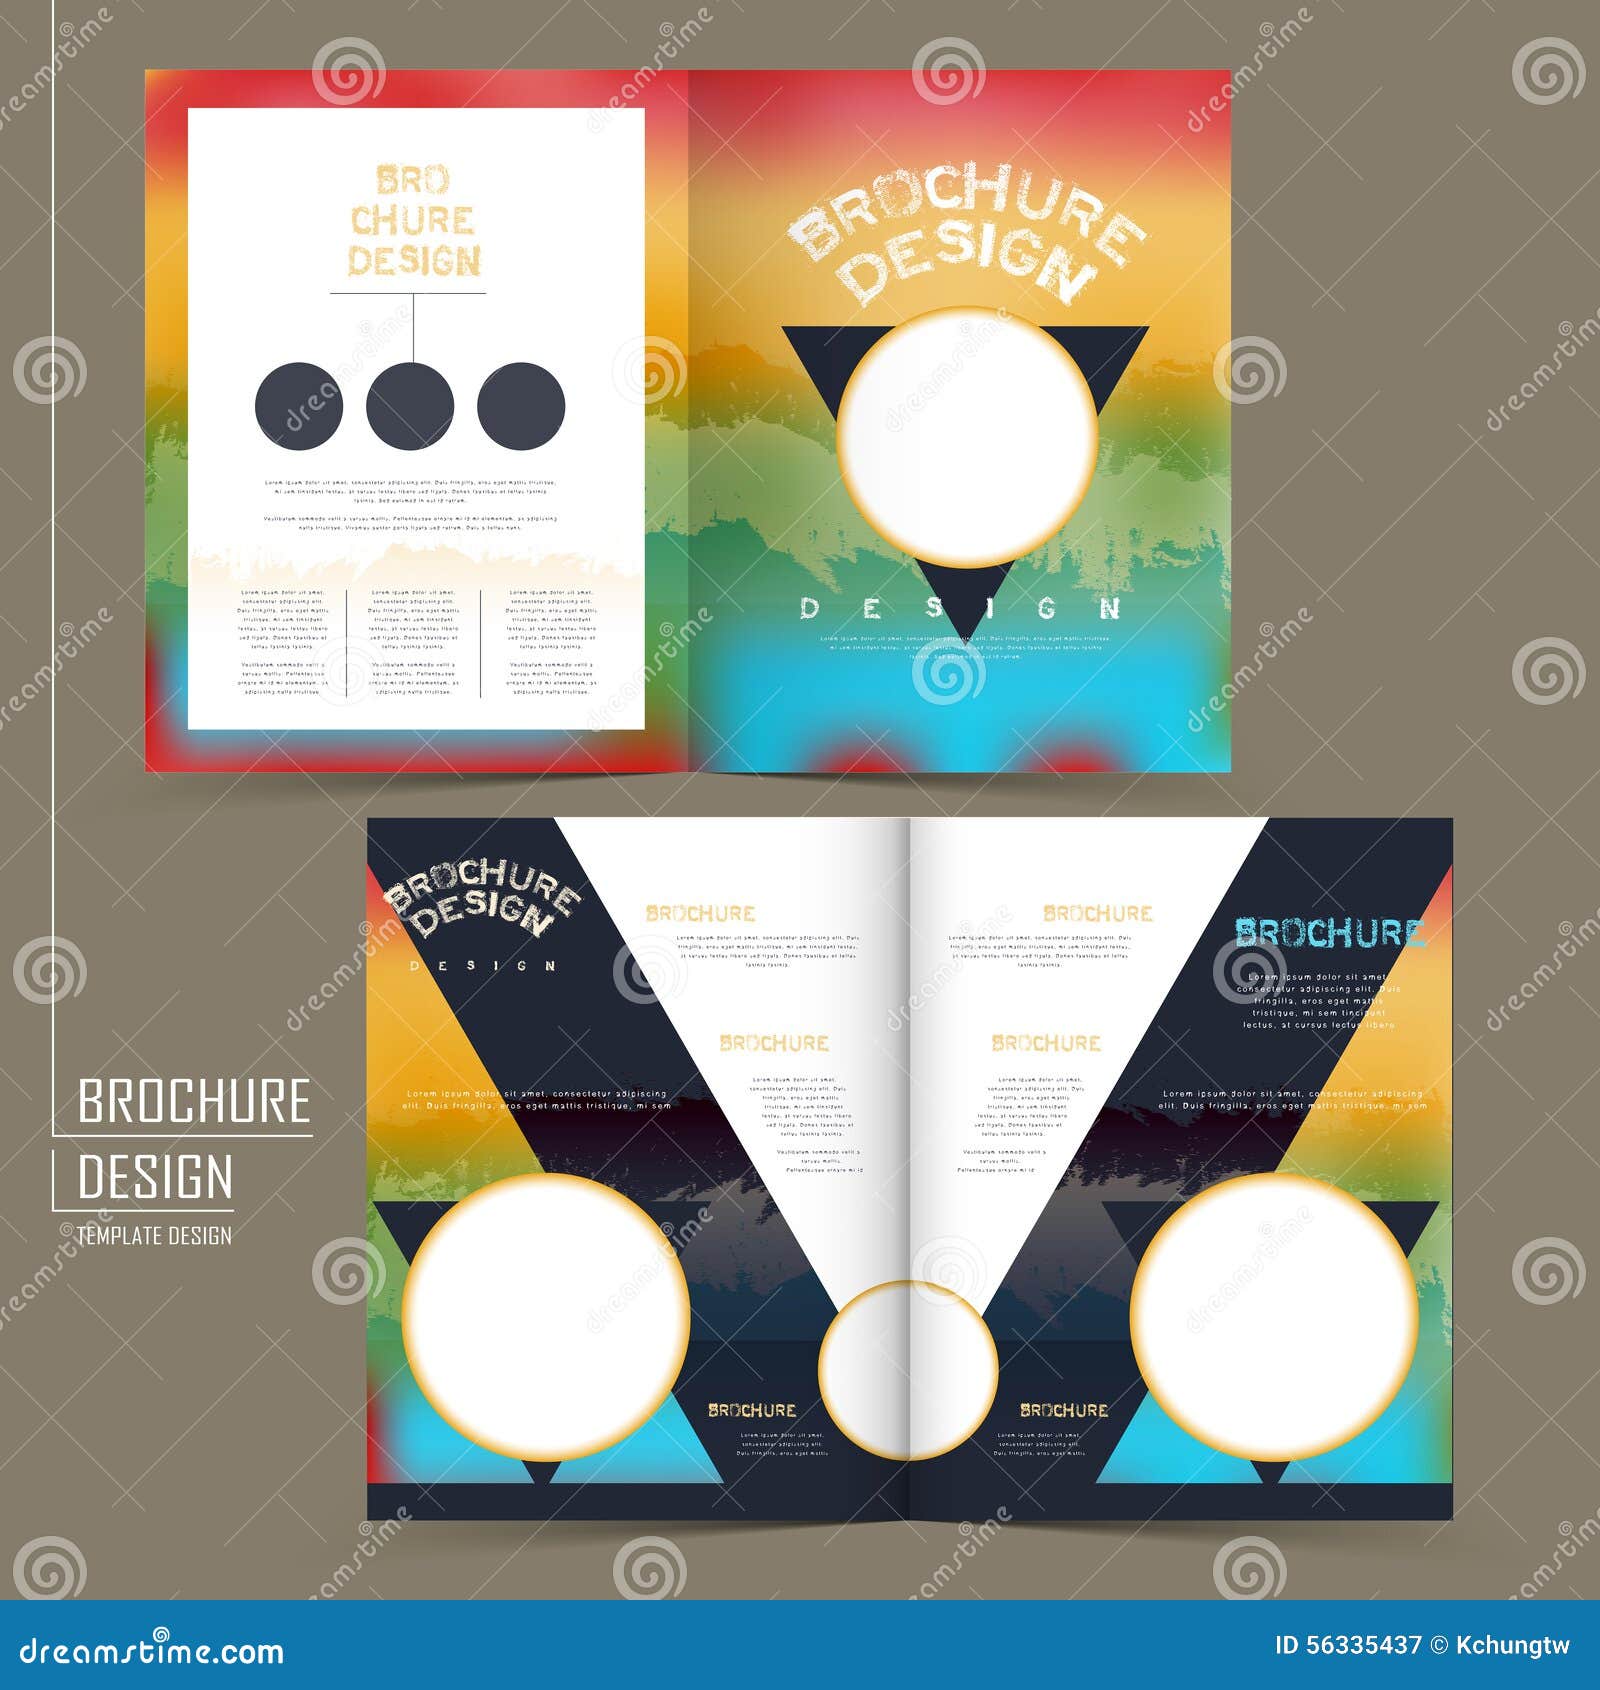 Half Fold Brochure Template from thumbs.dreamstime.com